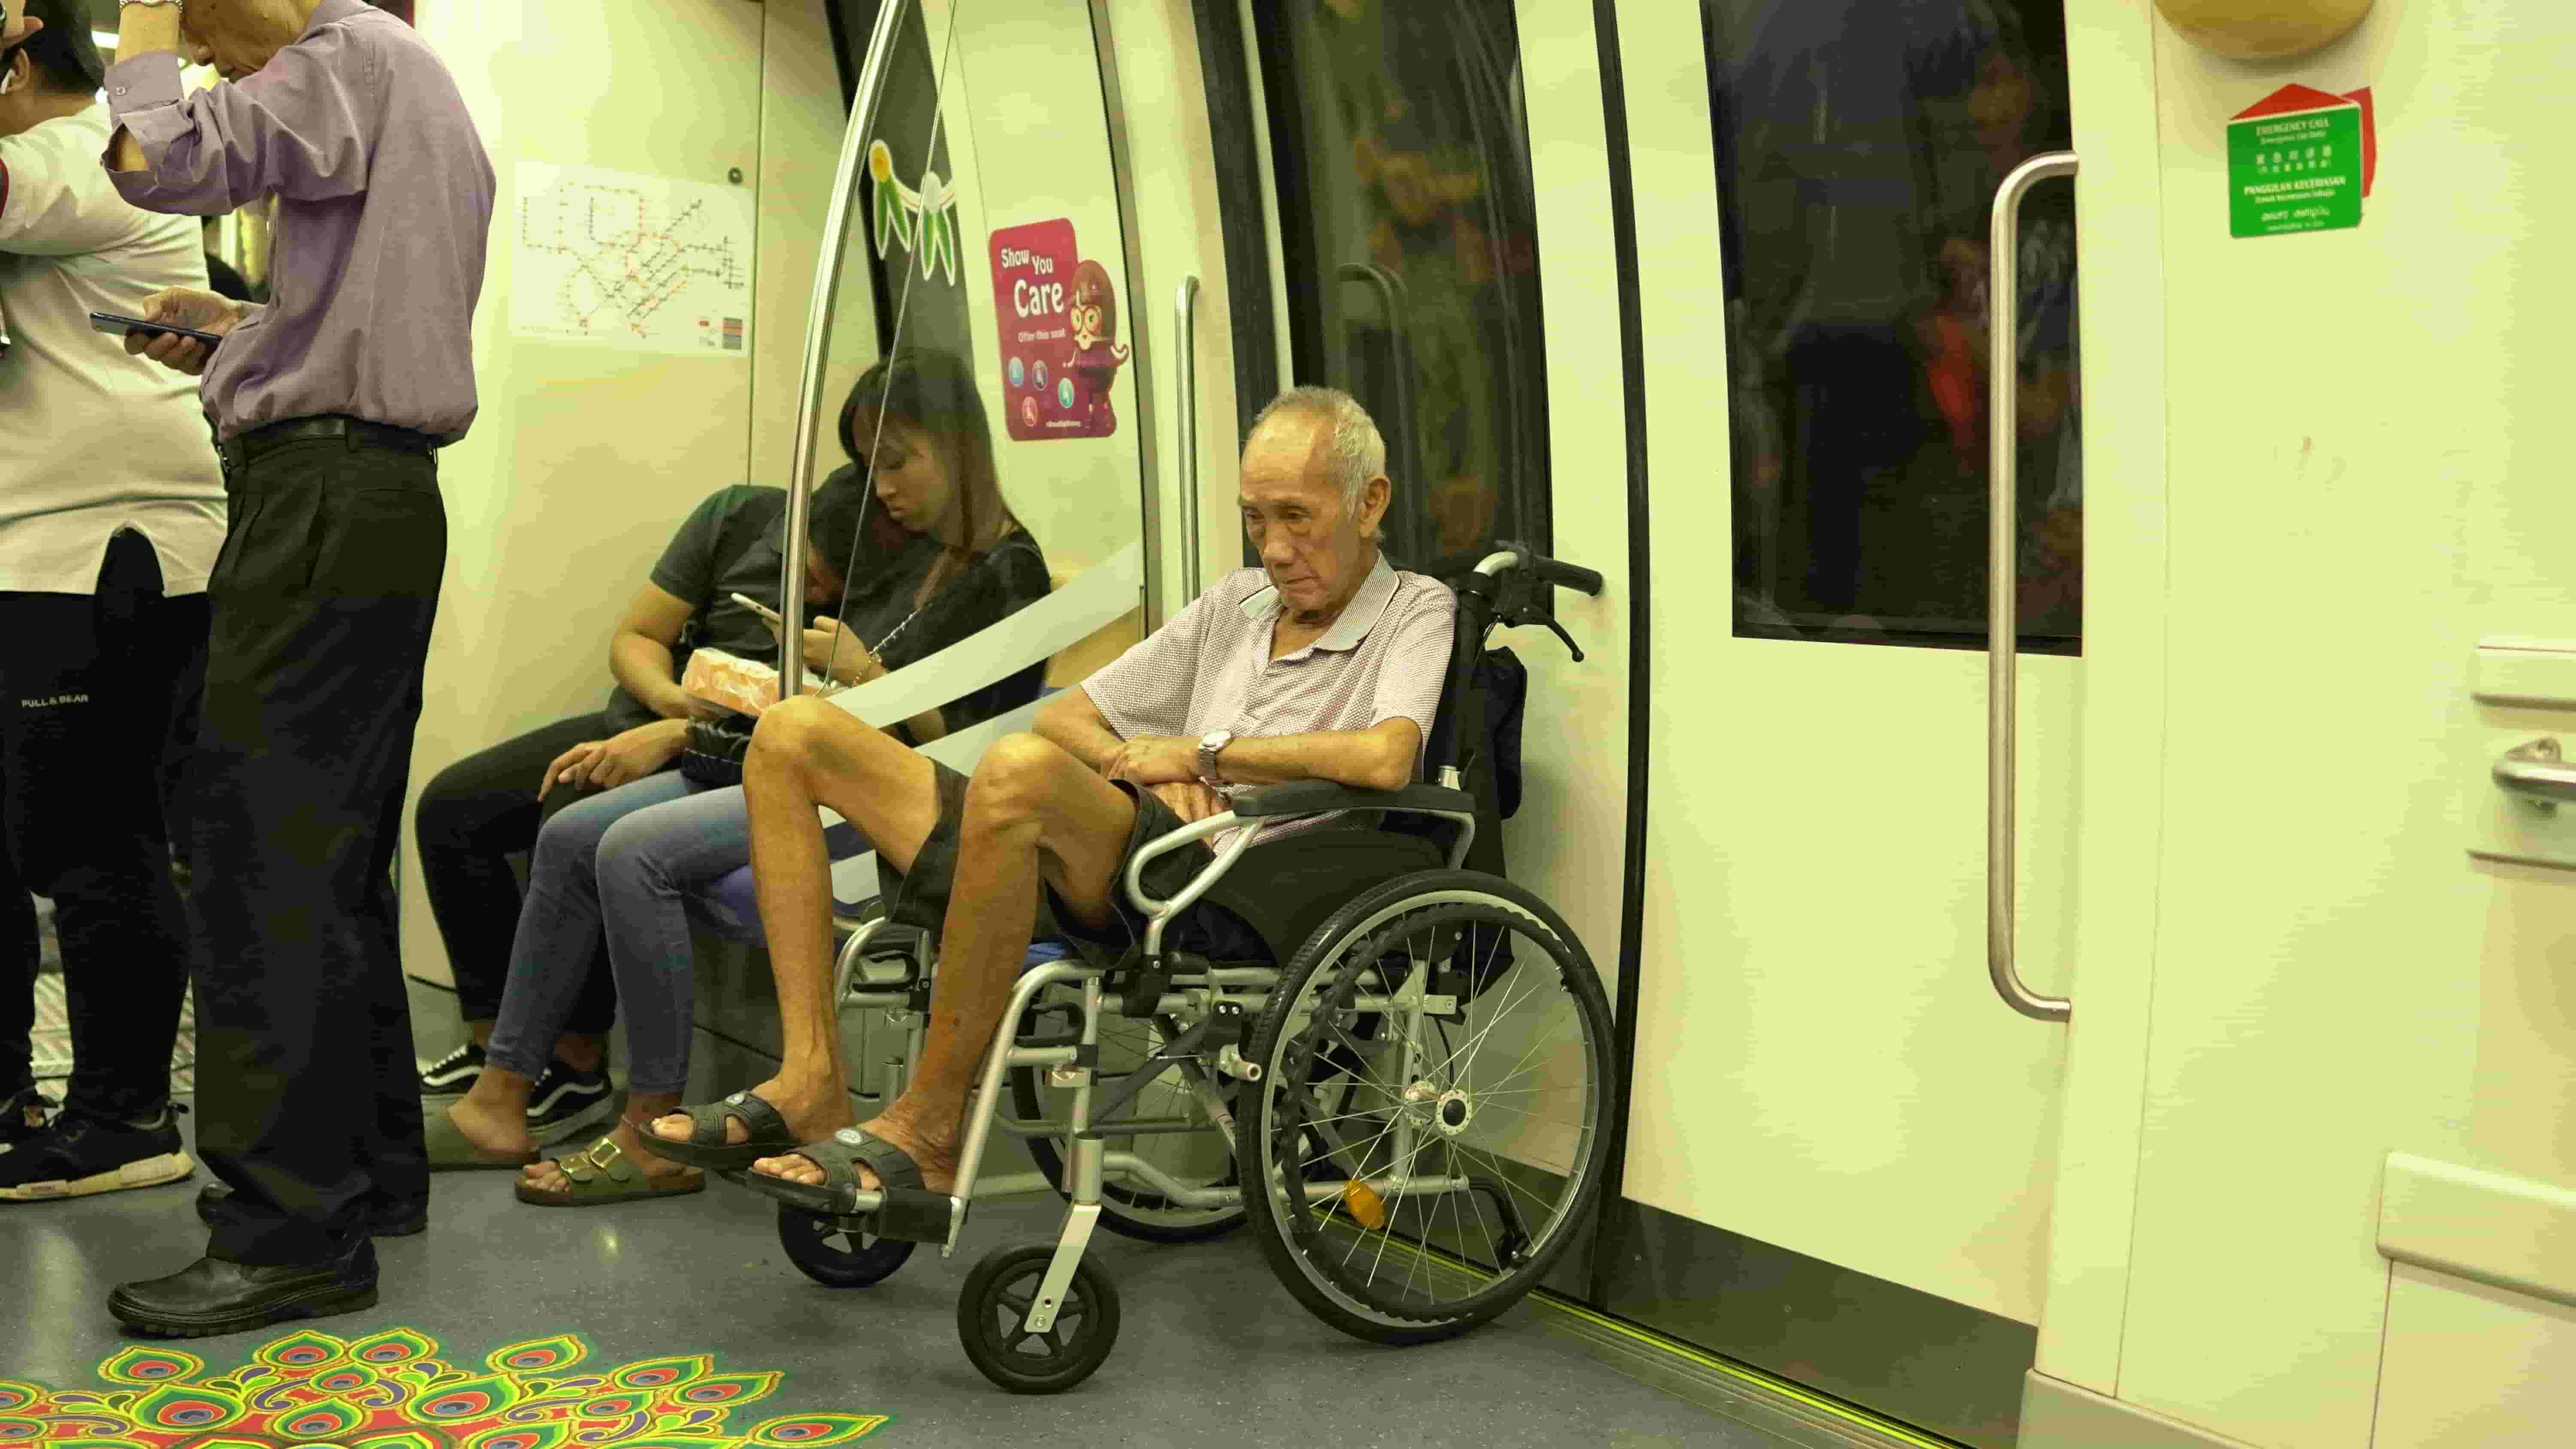 A man sits in a wheelchair on the tube, blocking the door as there are no available disabled spaces